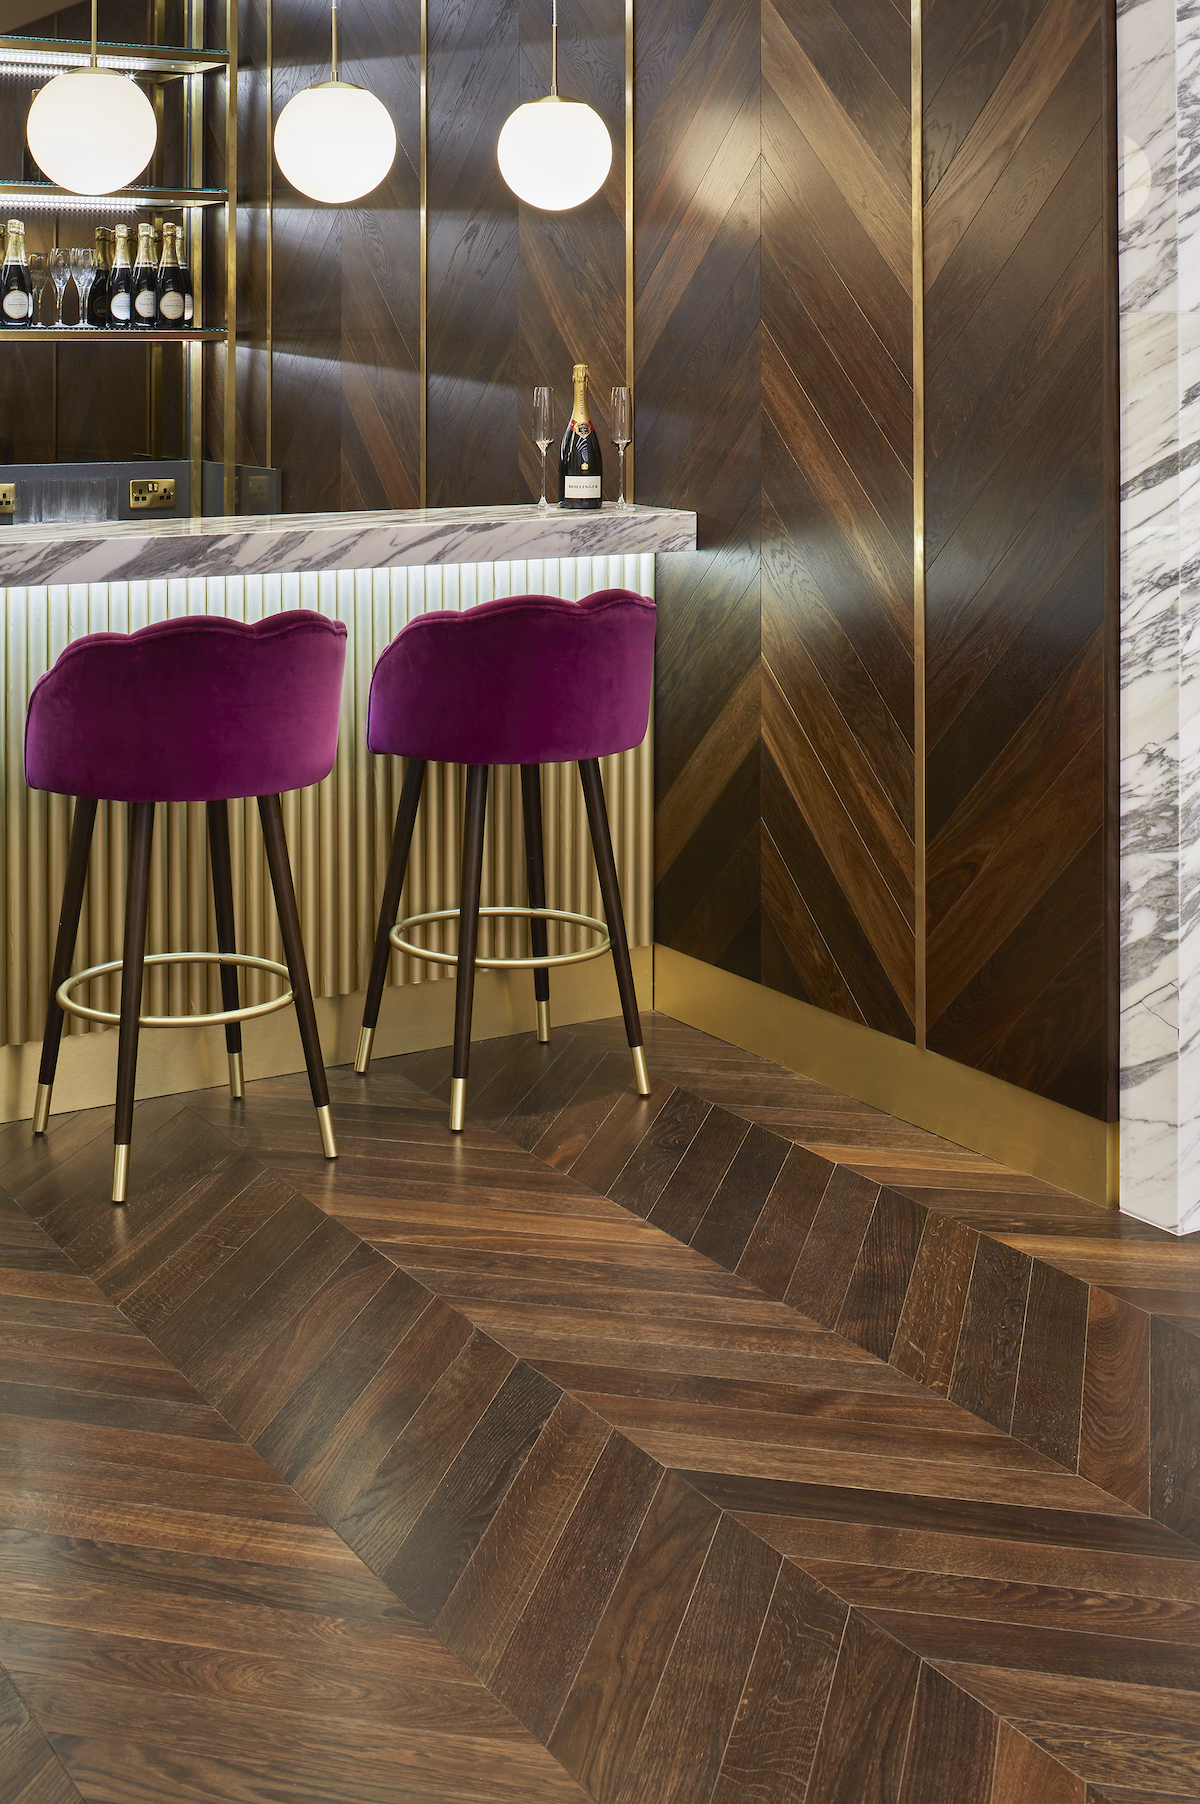 Dark wood flooring in bar with contemporary lighting and pink bar stools